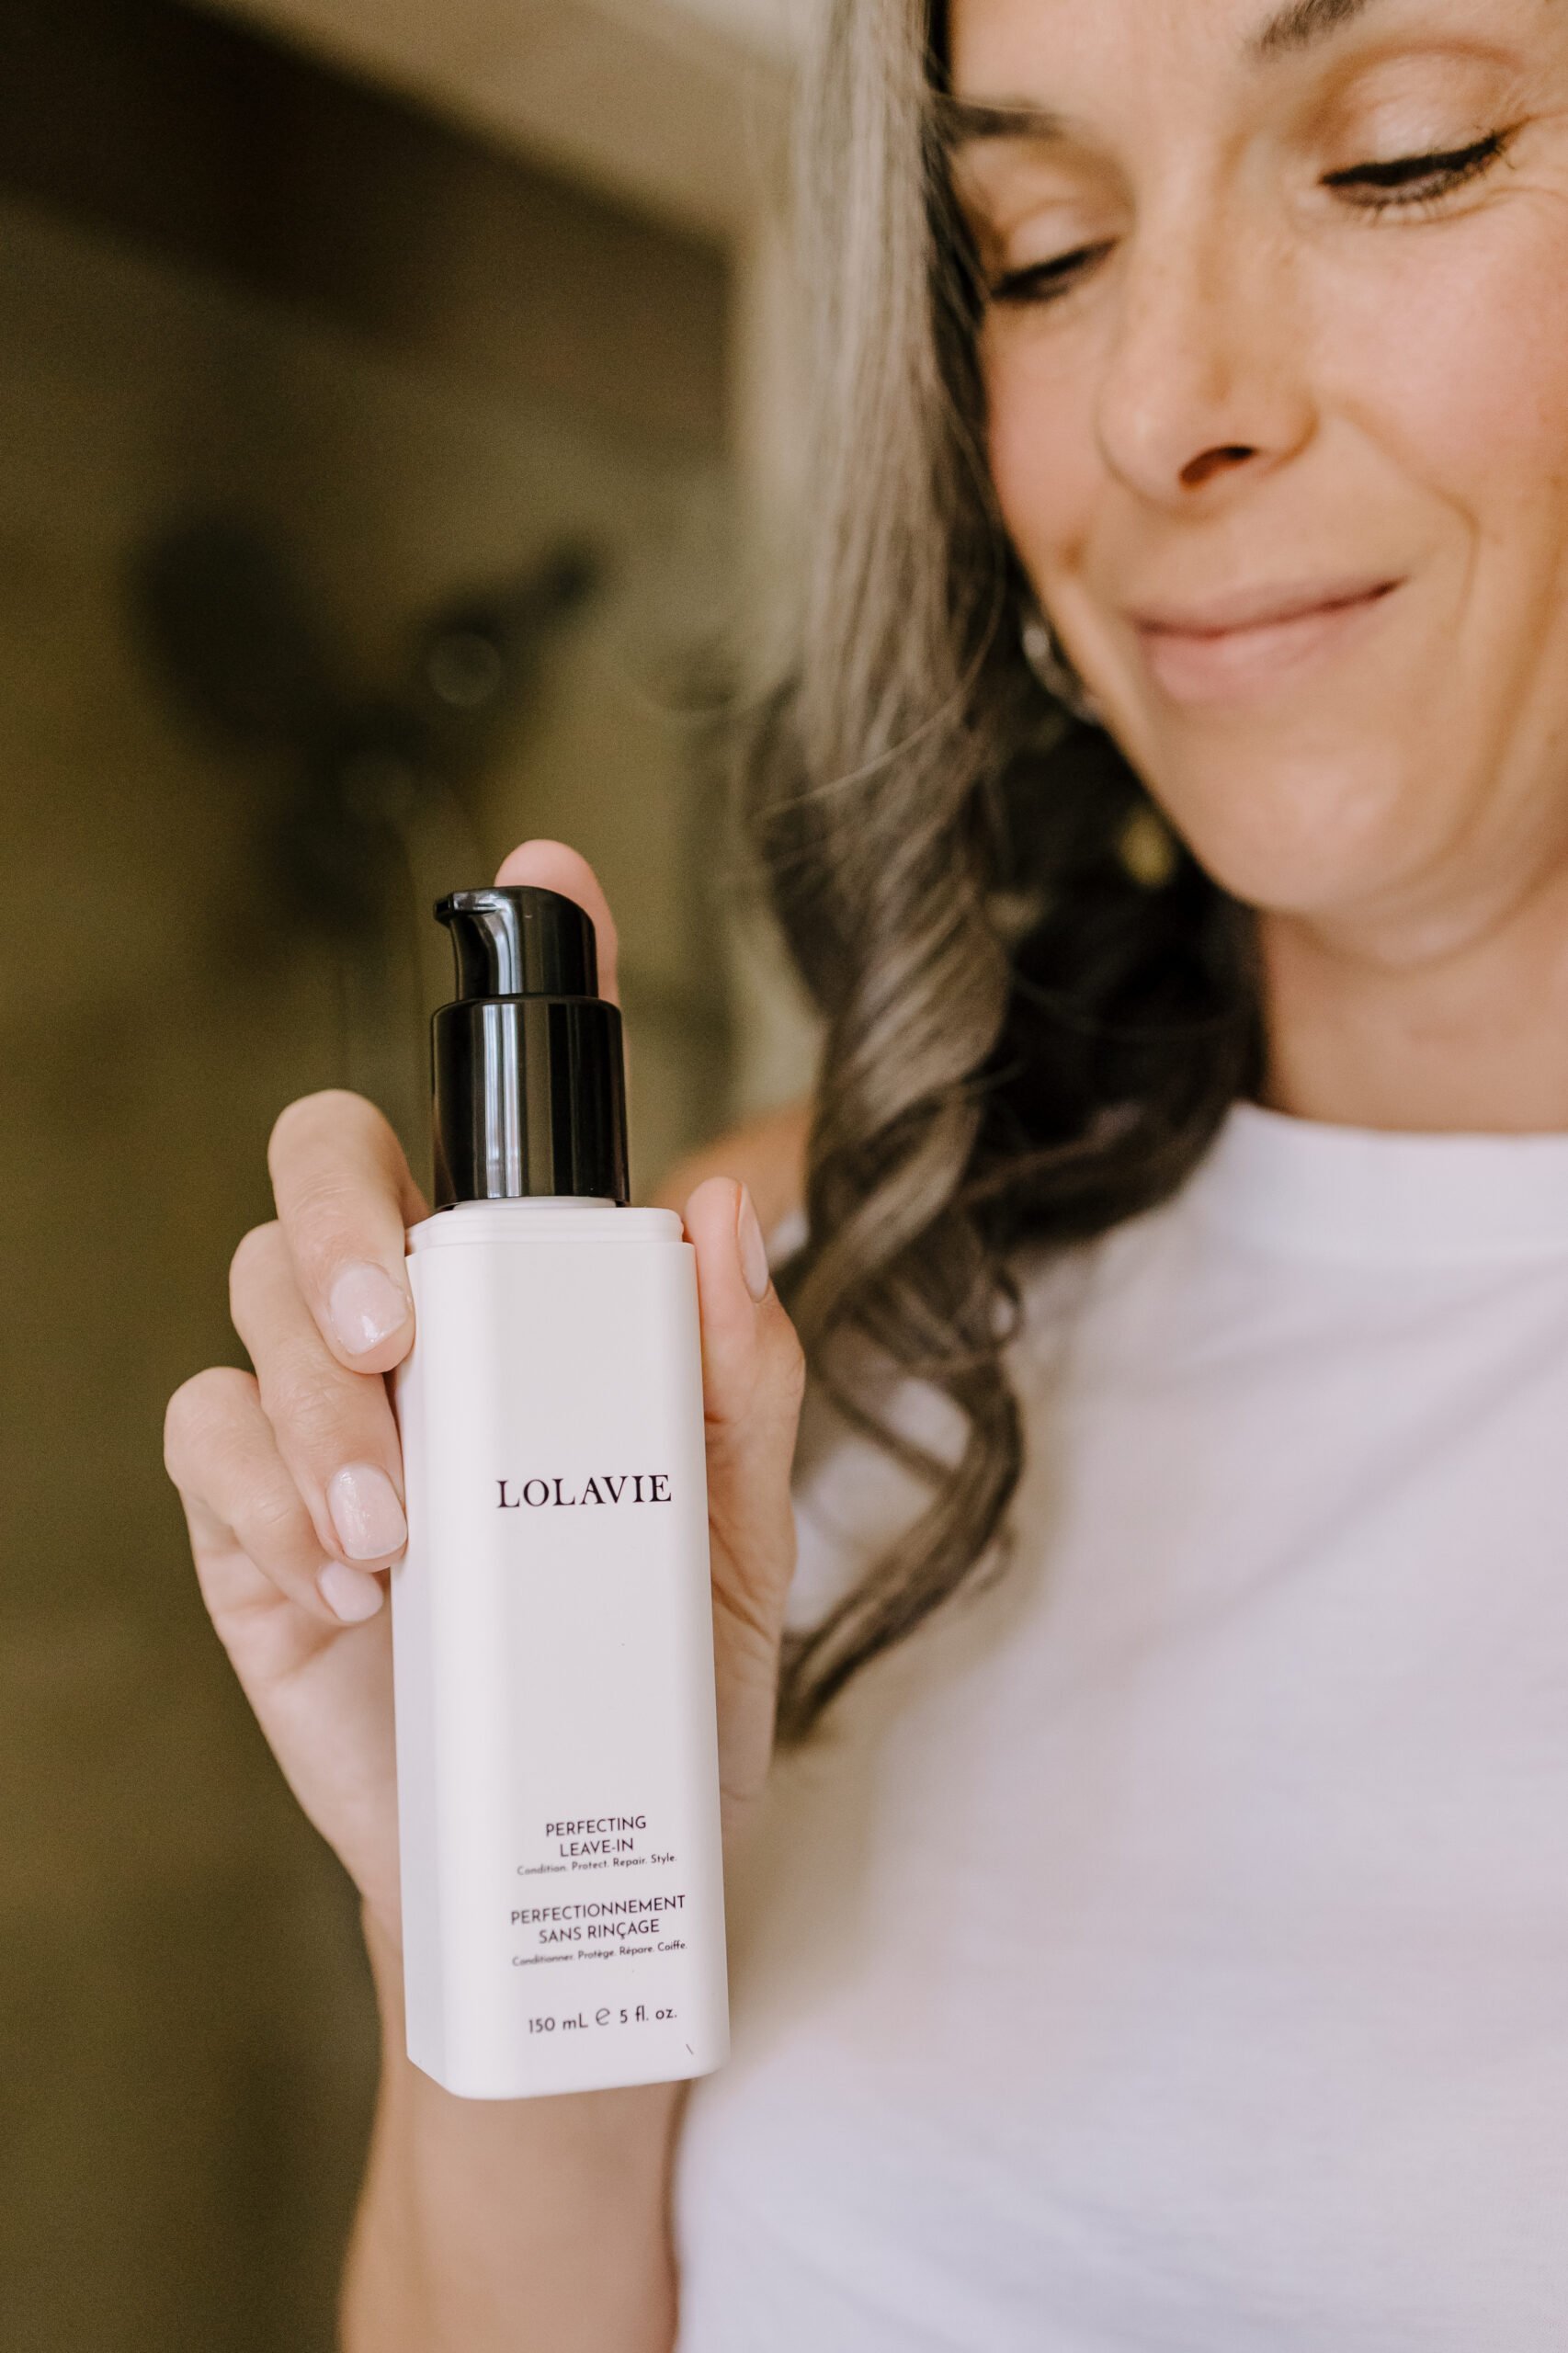 A woman holding up a bottle of LolaVie Perfecting Leave-In.